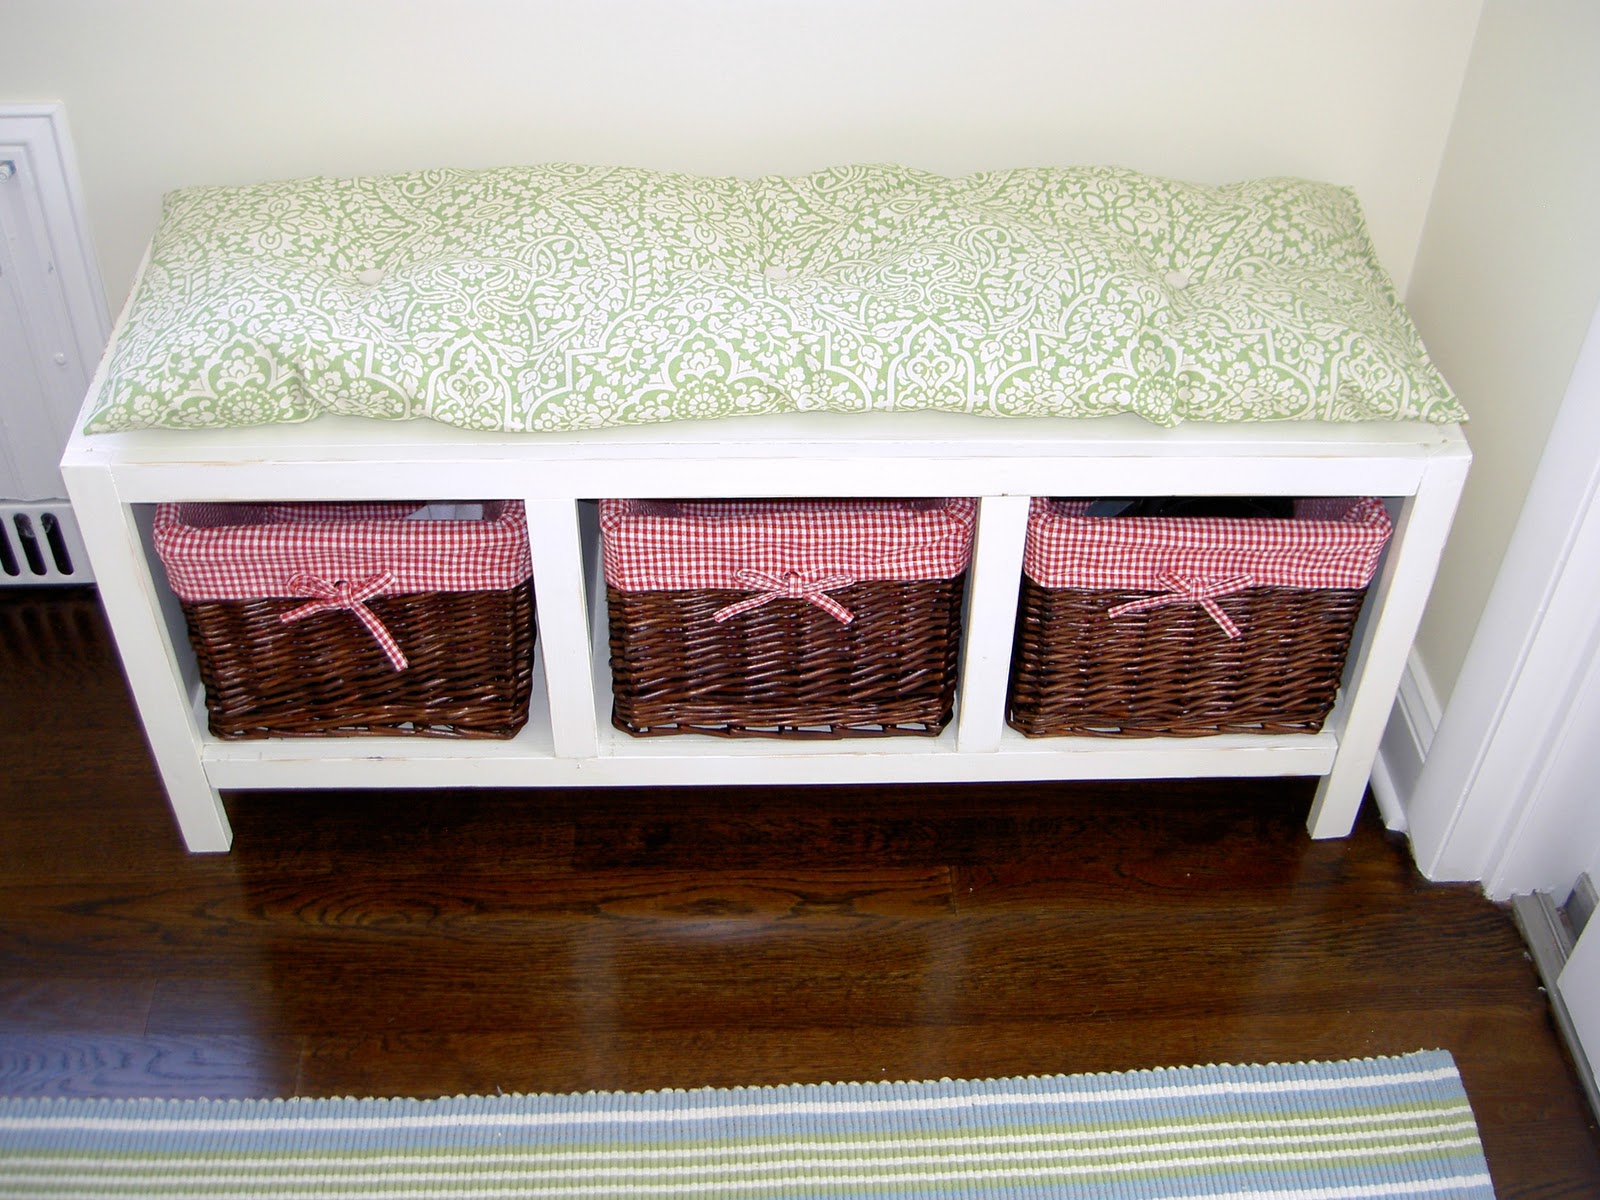 That's My Letter: DIY Bench with Storage Baskets